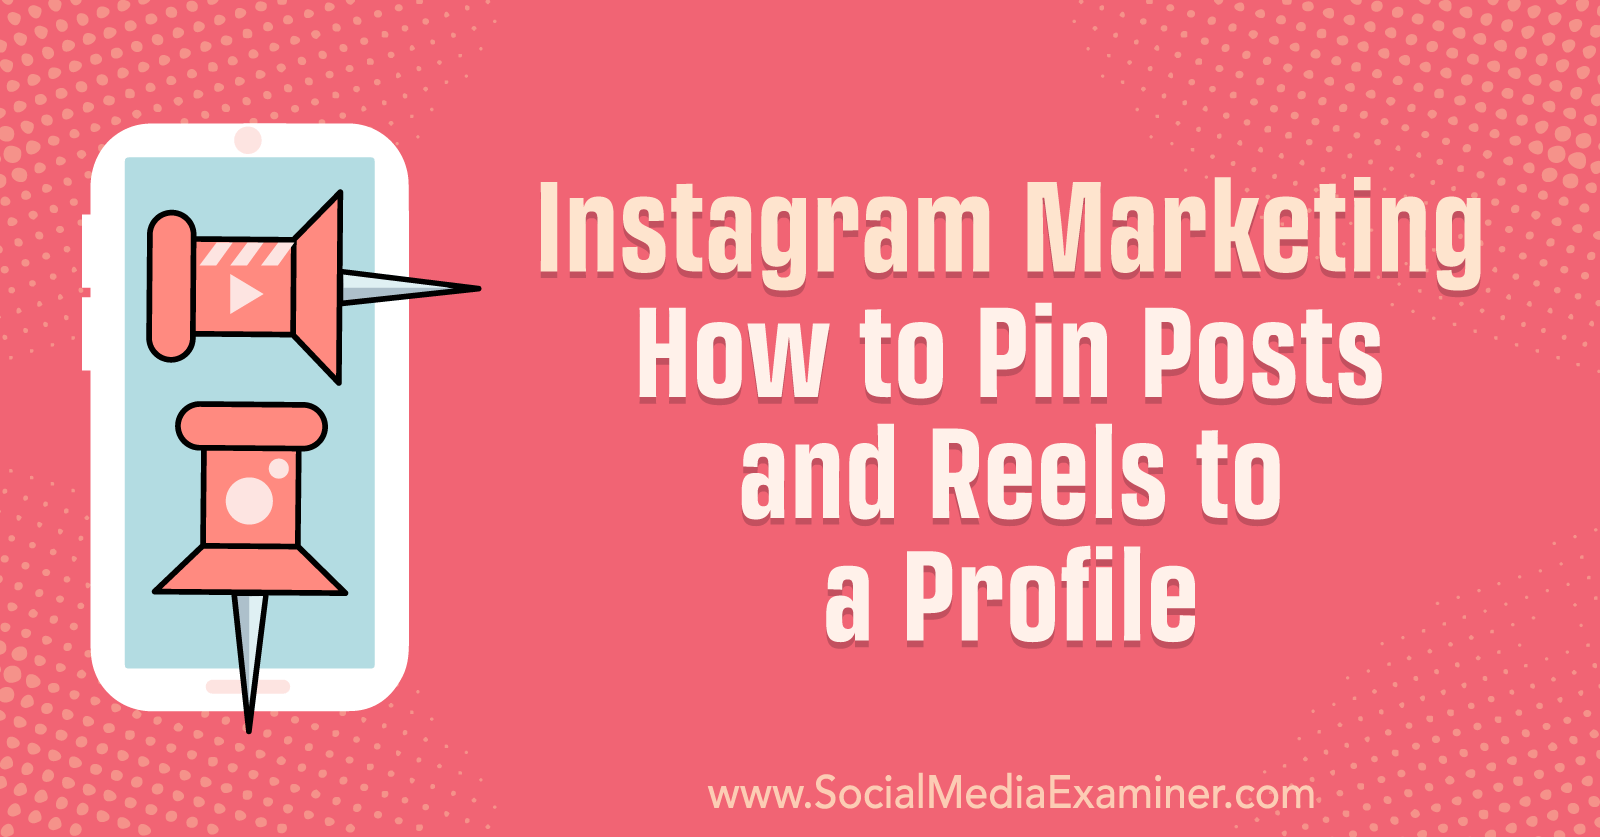 Instagram Marketing: How to Pin Posts and Reels to a Profile-Social Media Examiner